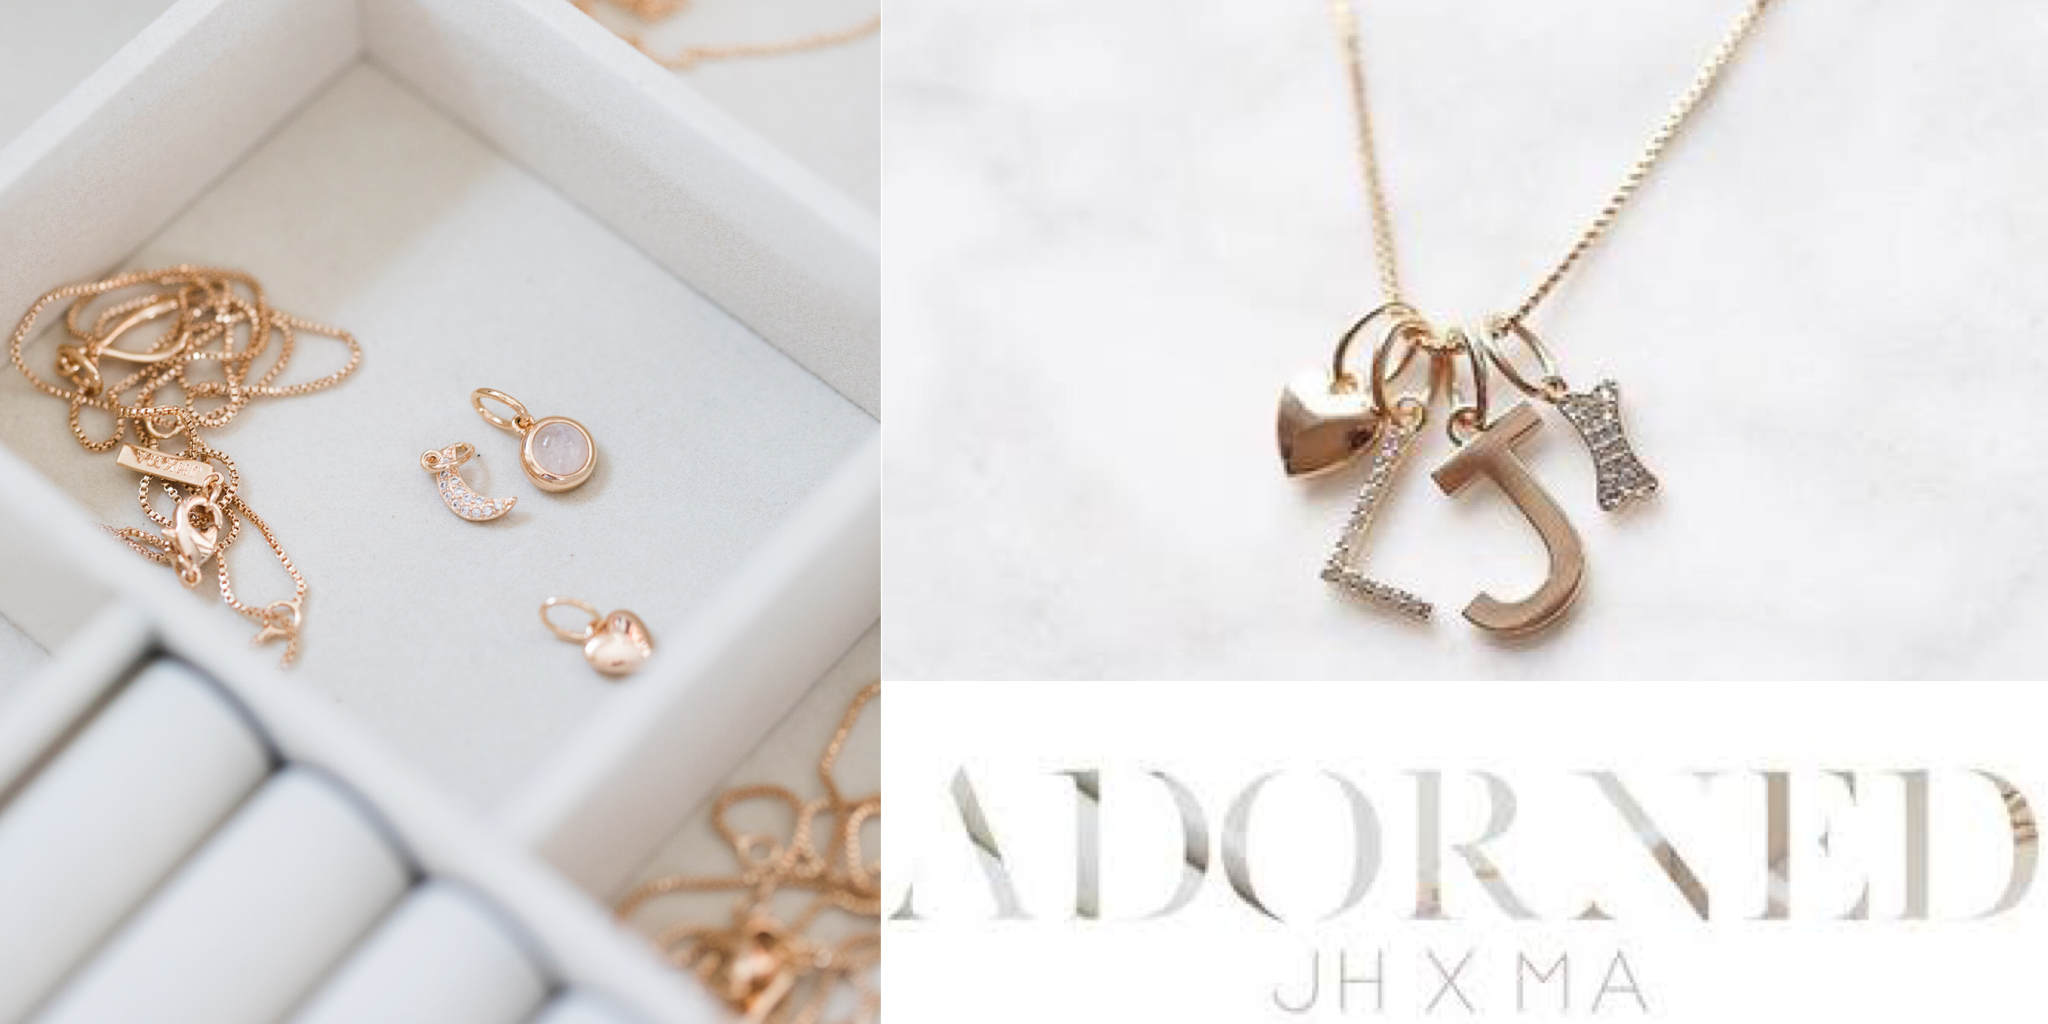 Introducing the JH x MA Adorned Collection!